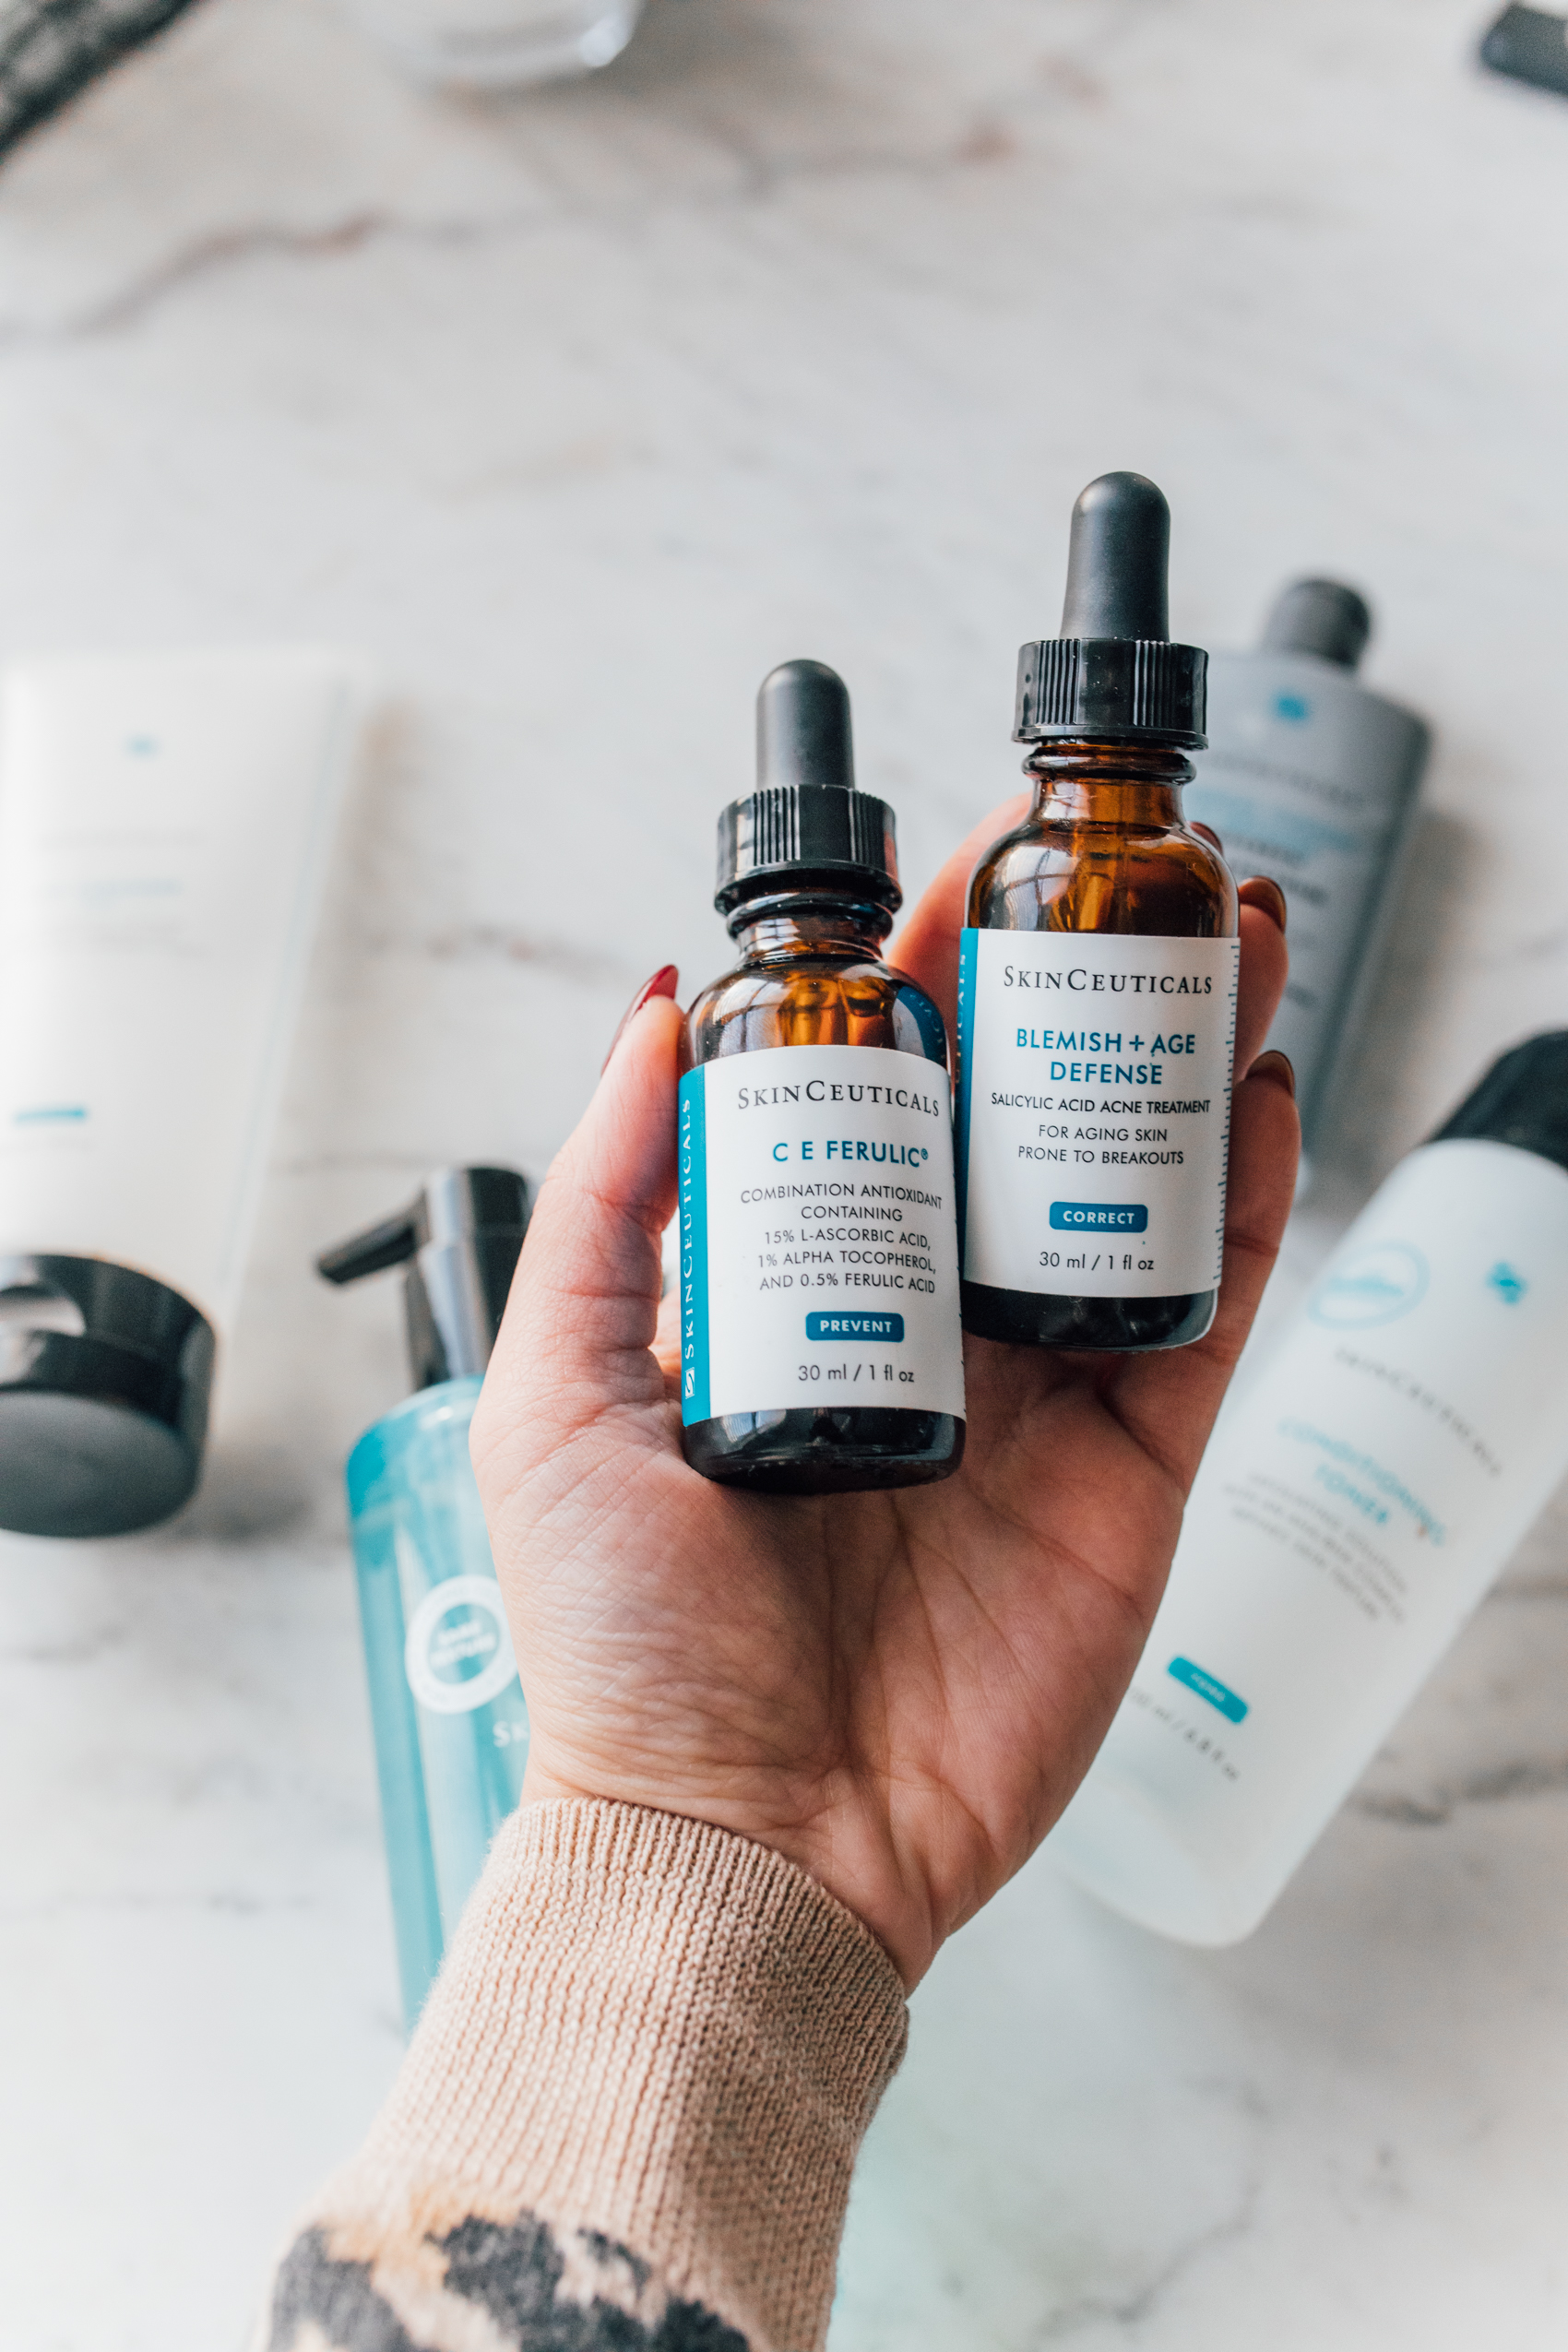 The Skinceuticals products I swear by for glowing skin